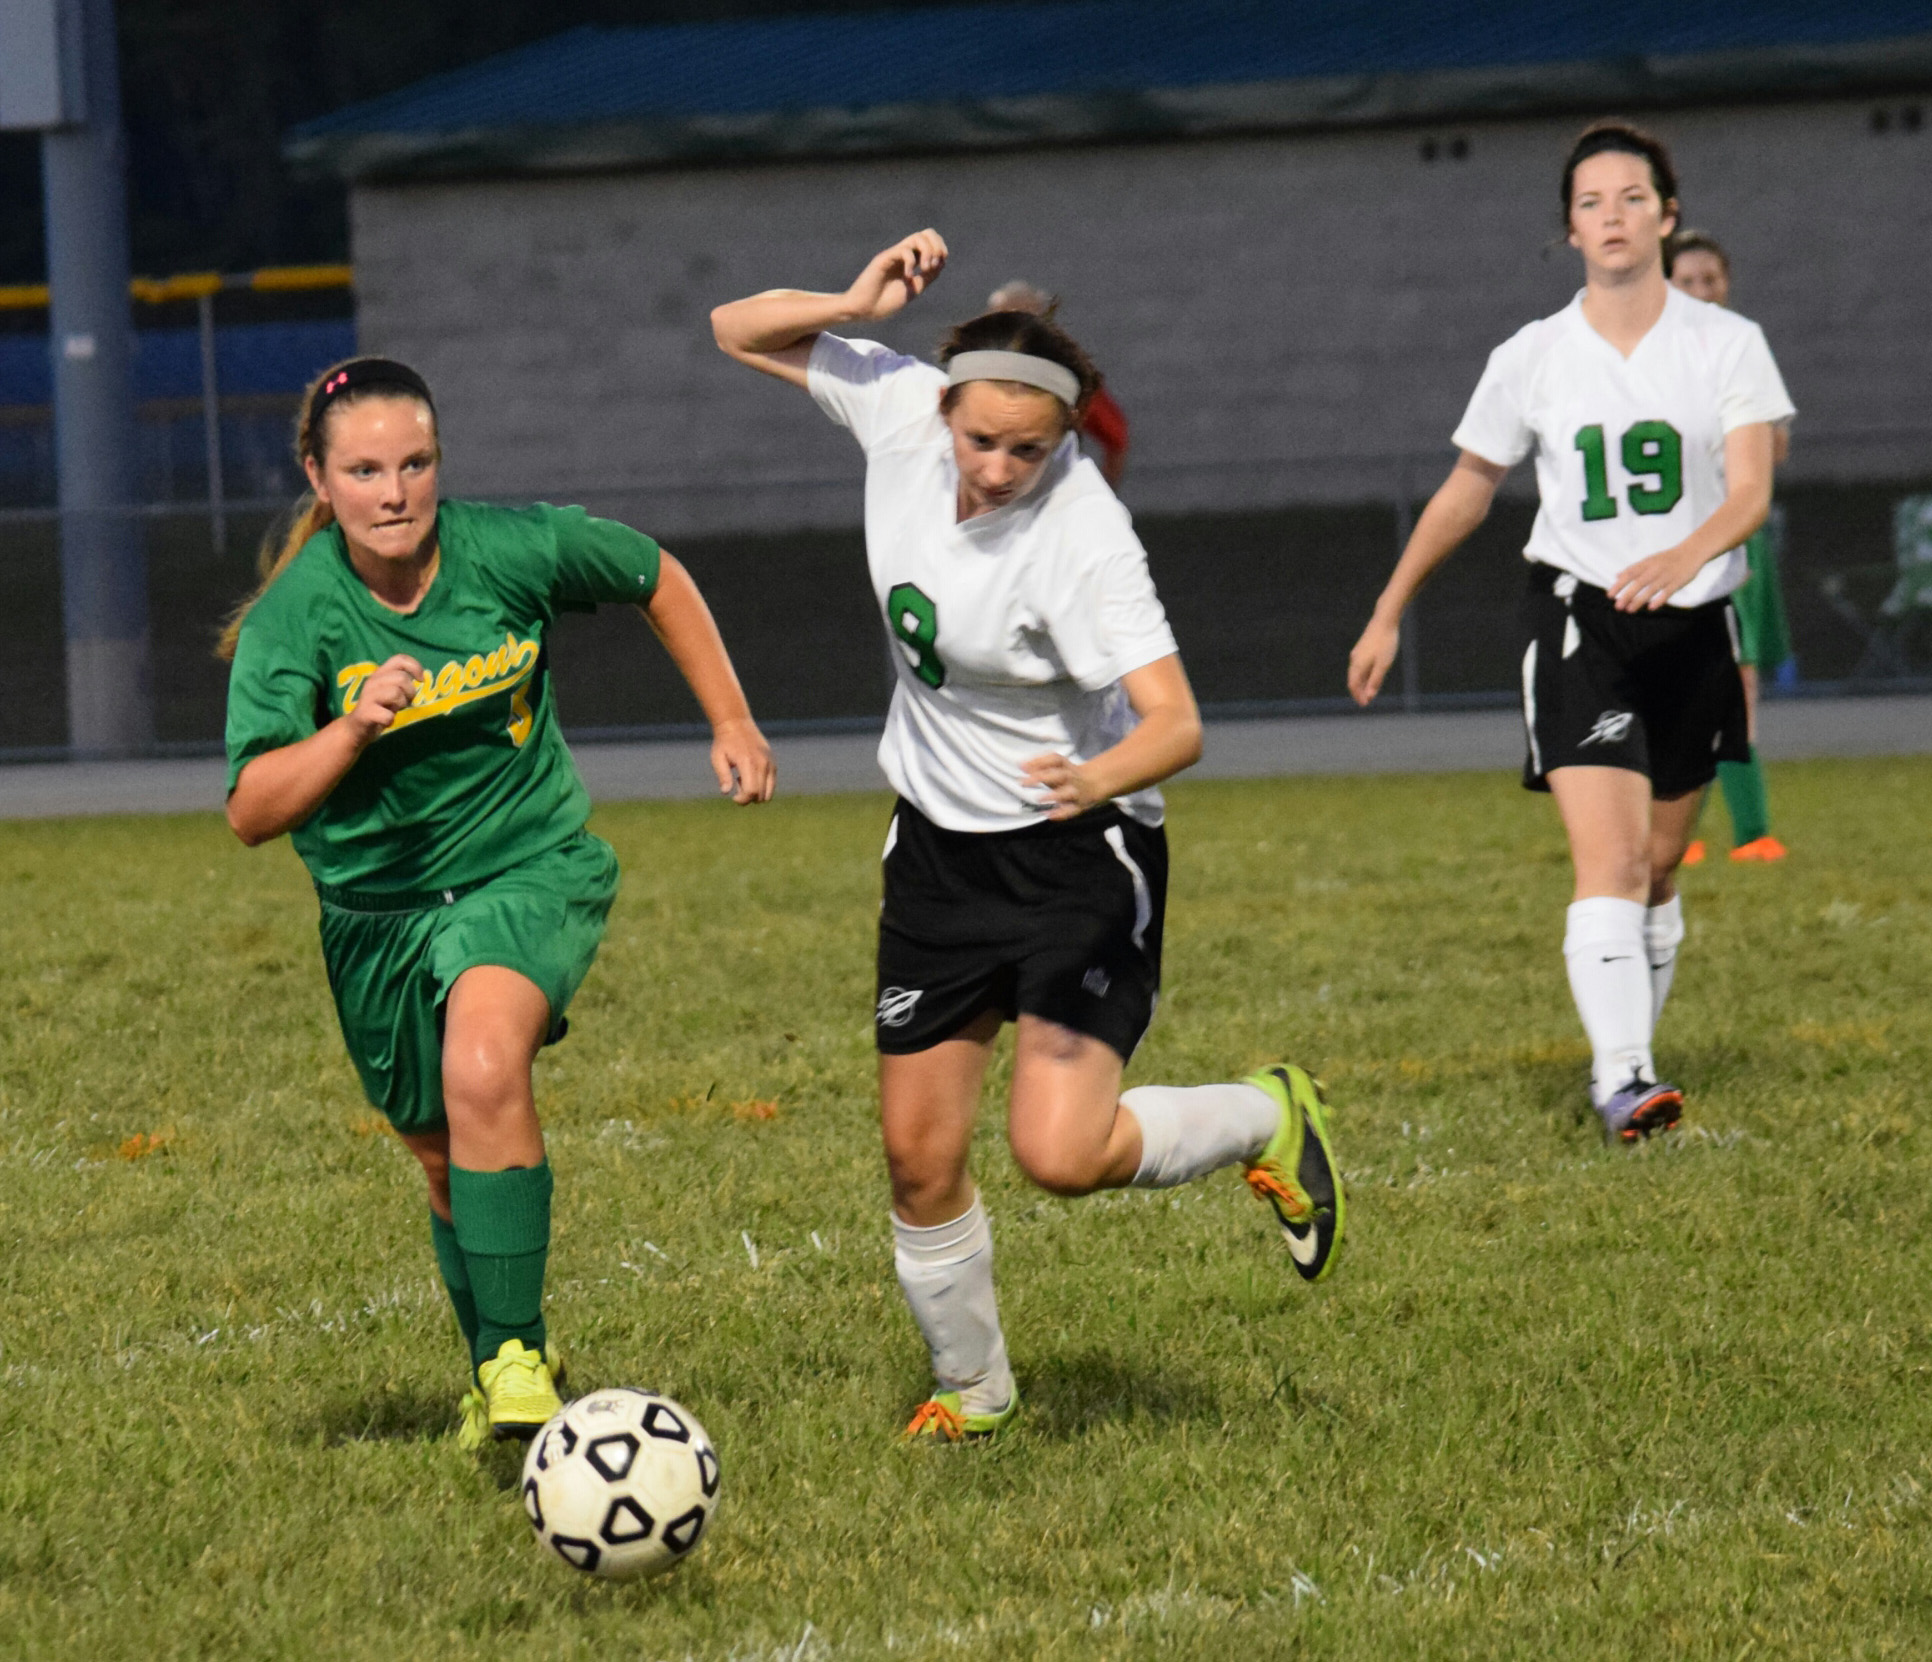 West Union’s Shannon Runyan, left,  chases down the ball with Fayetteville players in pursuit during the Lady Dragons’ 3-1 win on Monday night.